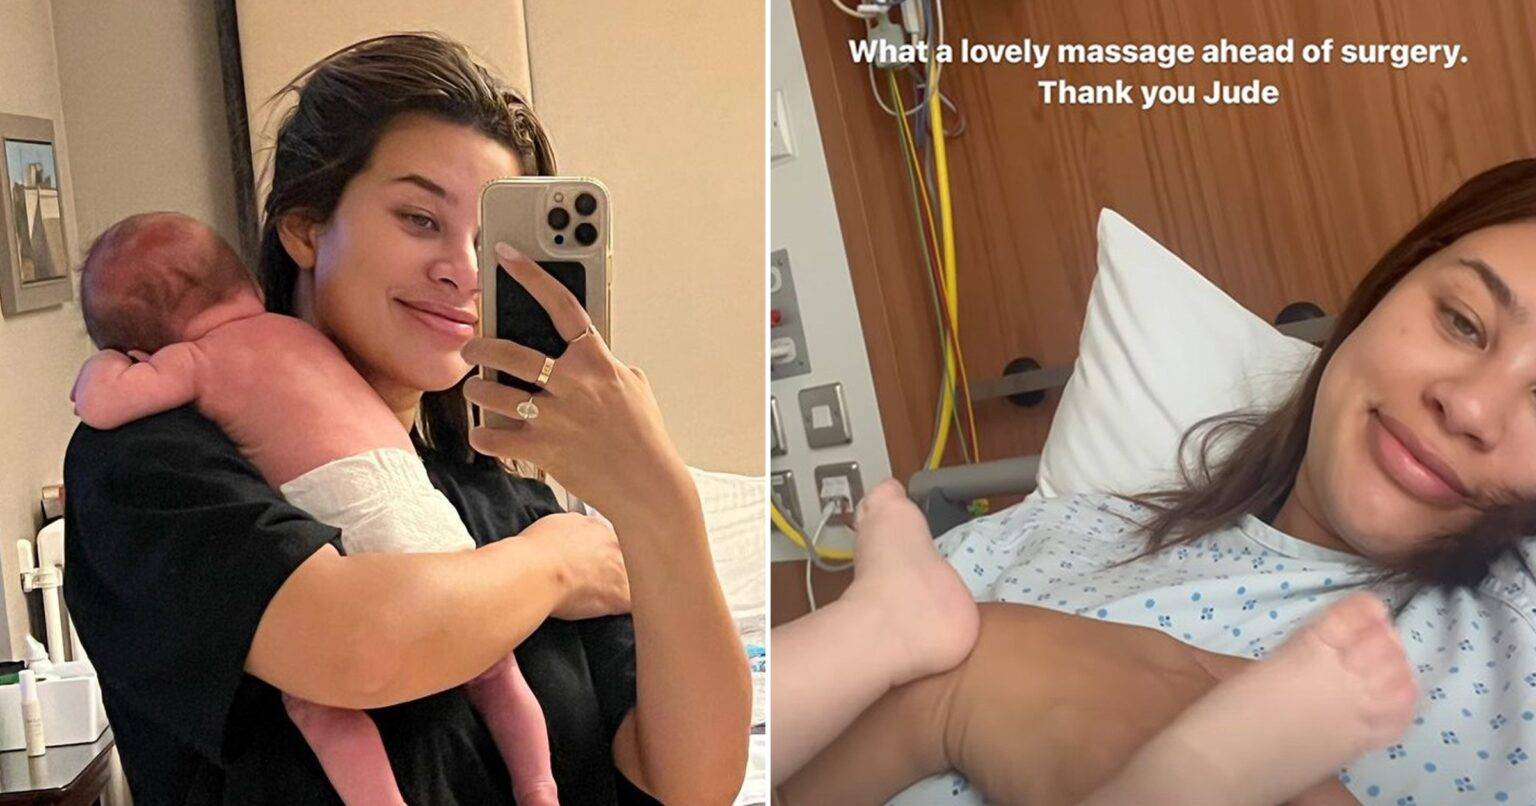 Love Island star Montana Brown undergoing surgery almost 3 months after giving birth